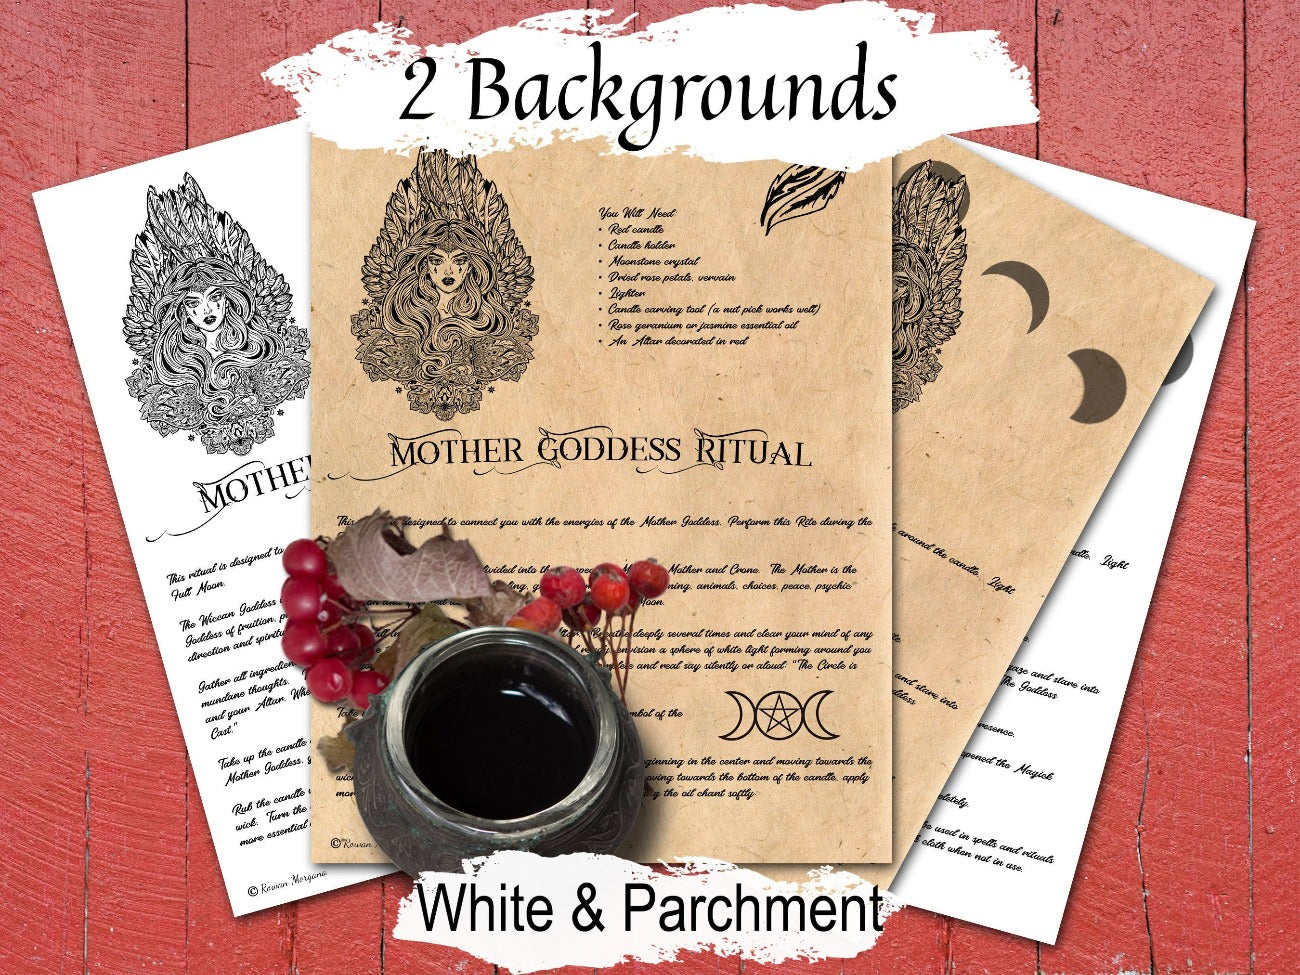 MOTHER GODDESS RITUAL 2 Pages, Wicca Full Moon Goddess Spell, Honor Goddess Prayer Invocation , Wicca Moonlight Witchcraft Ritual Spell - Morgana Magick Spell